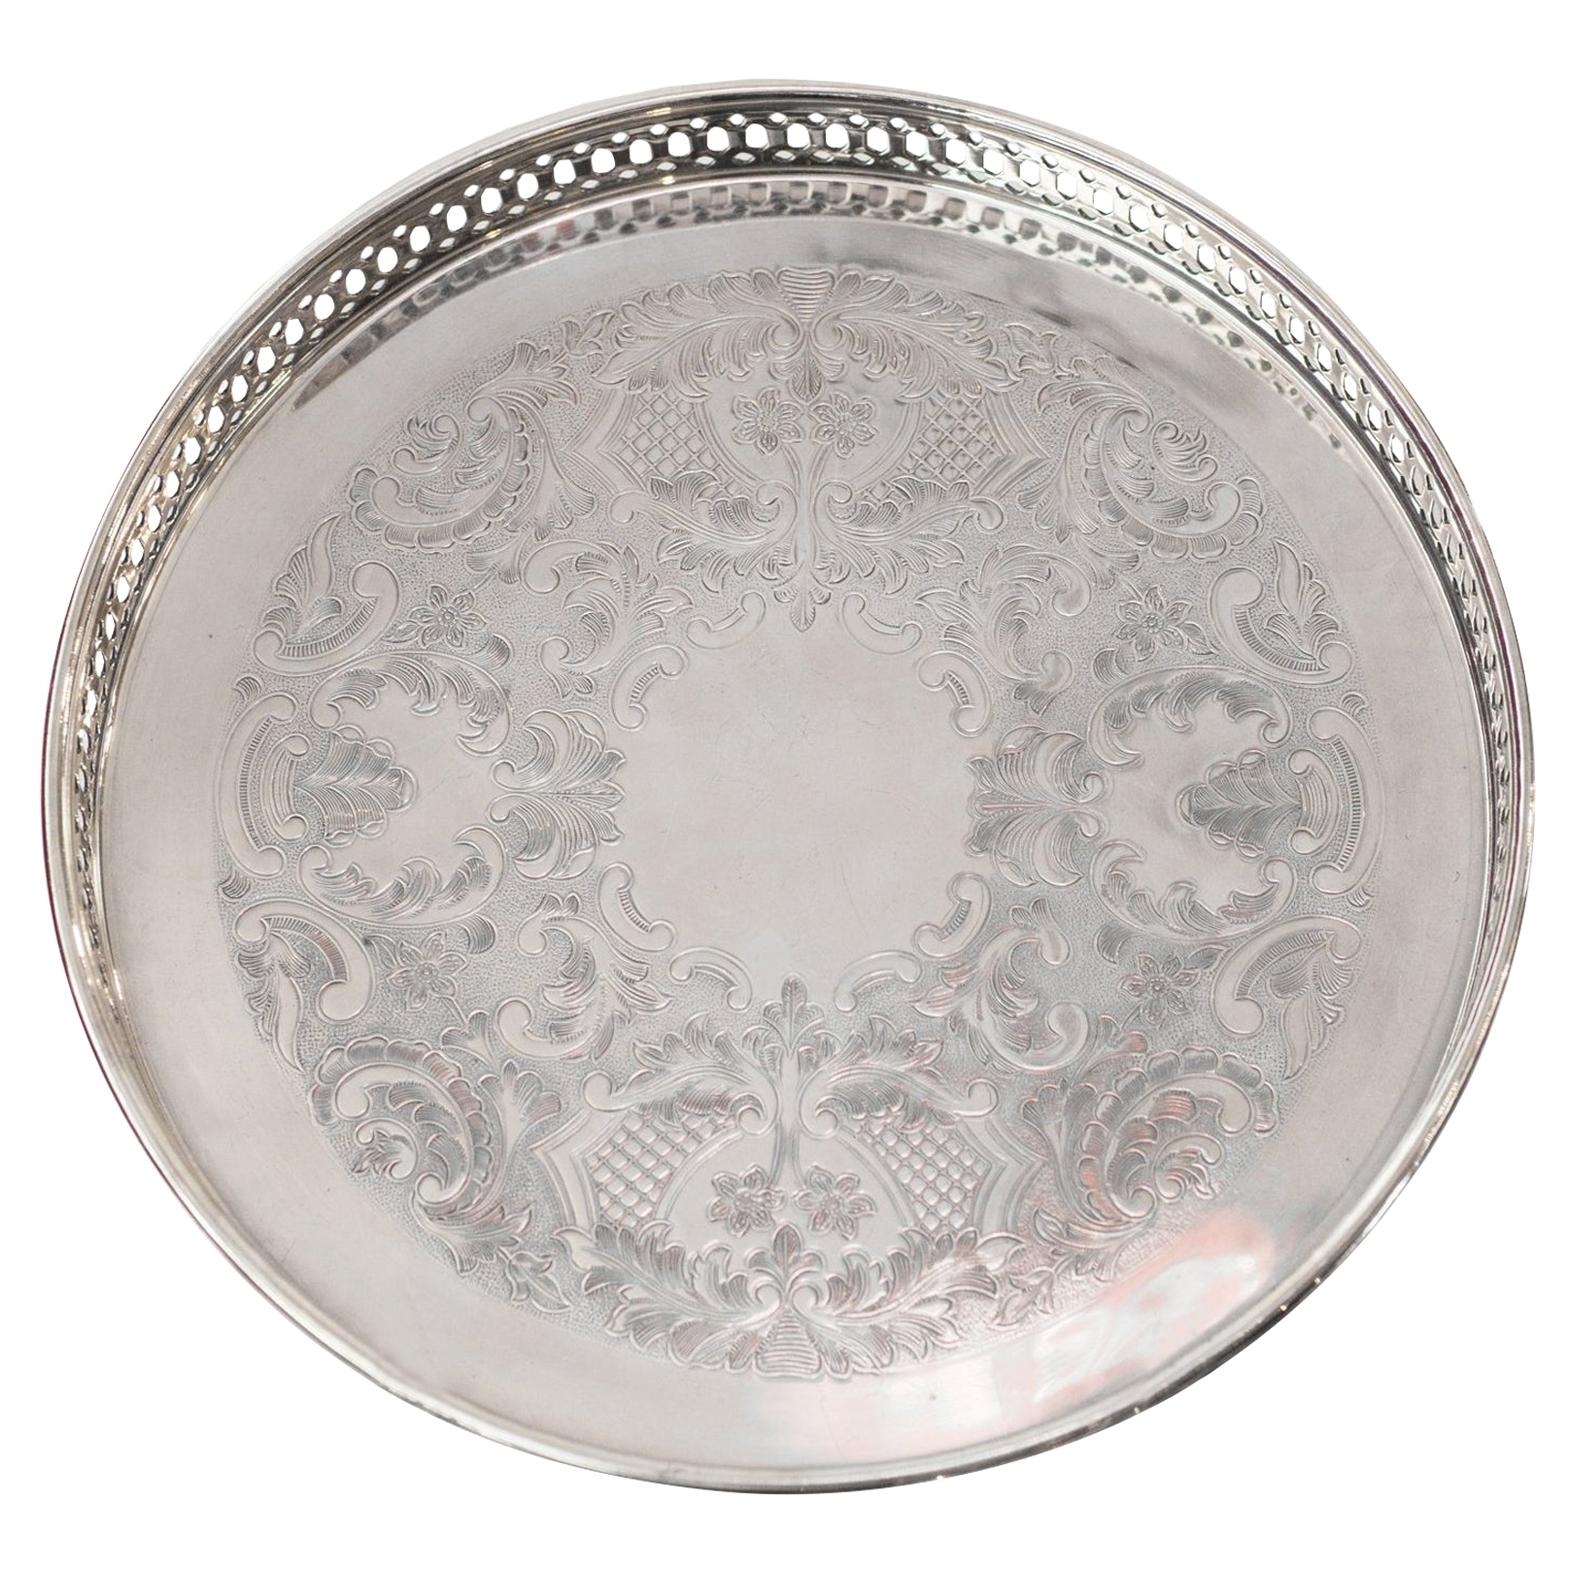 Antique Small Silver Plate Round Serving Tray with Gallery Rim